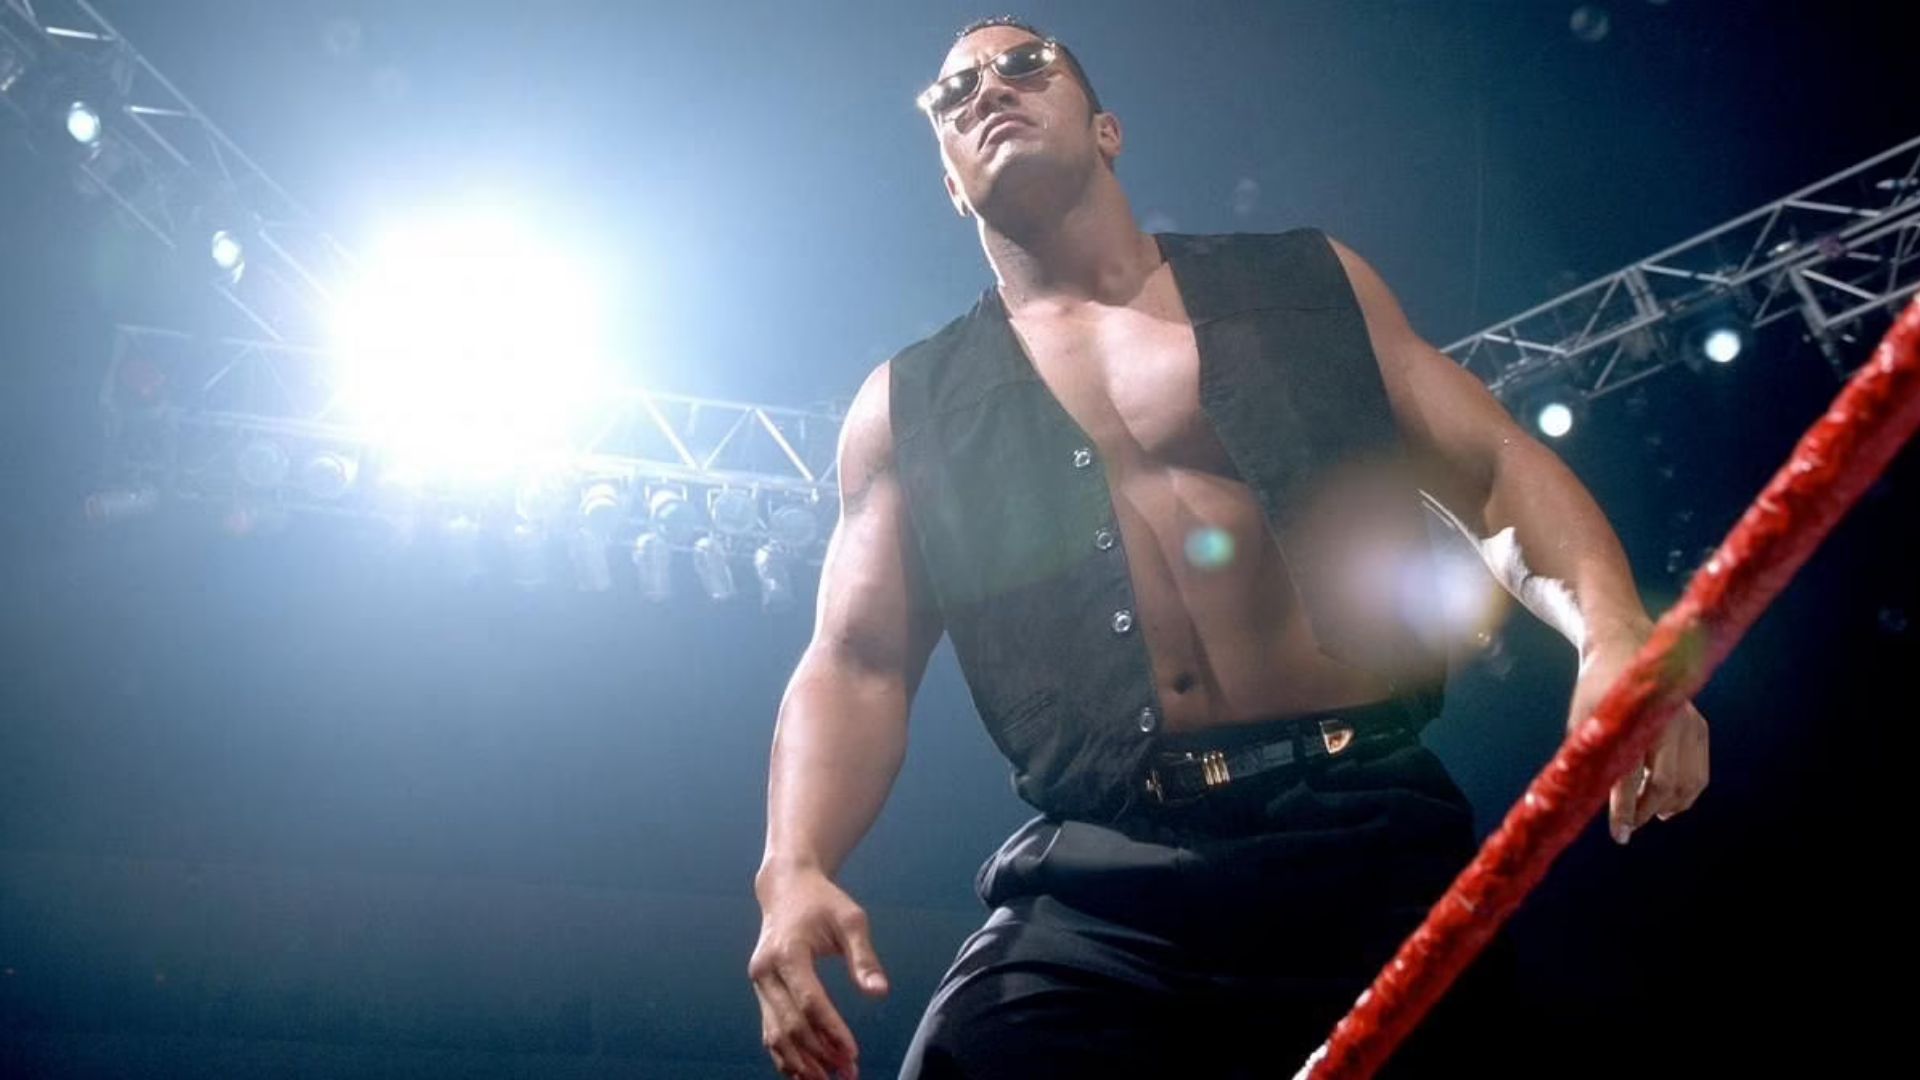 The Rock was one of the biggest superstars during the Attitude Era